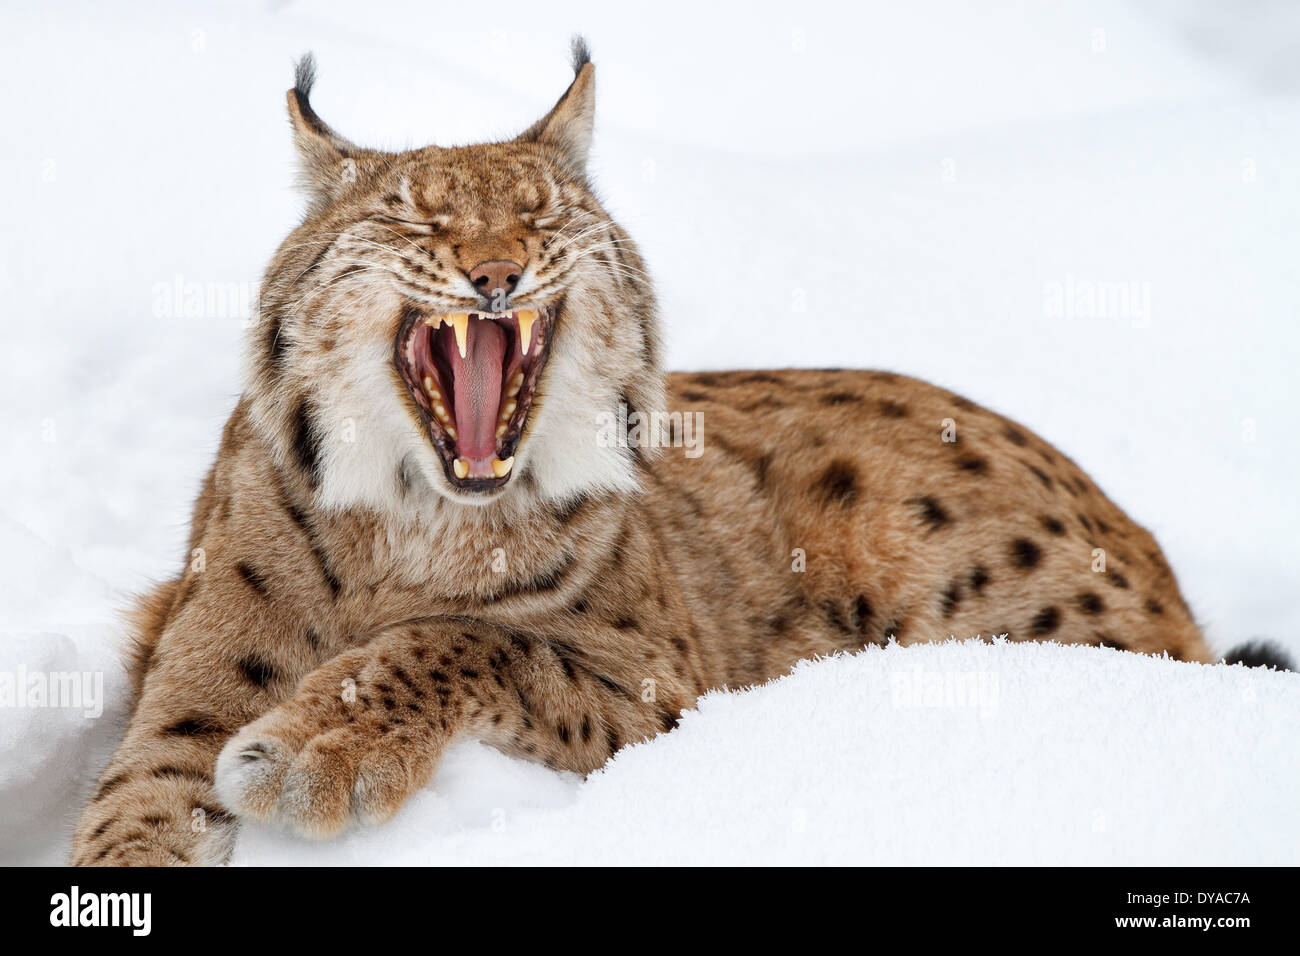 A lynx in the snow Stock Photo